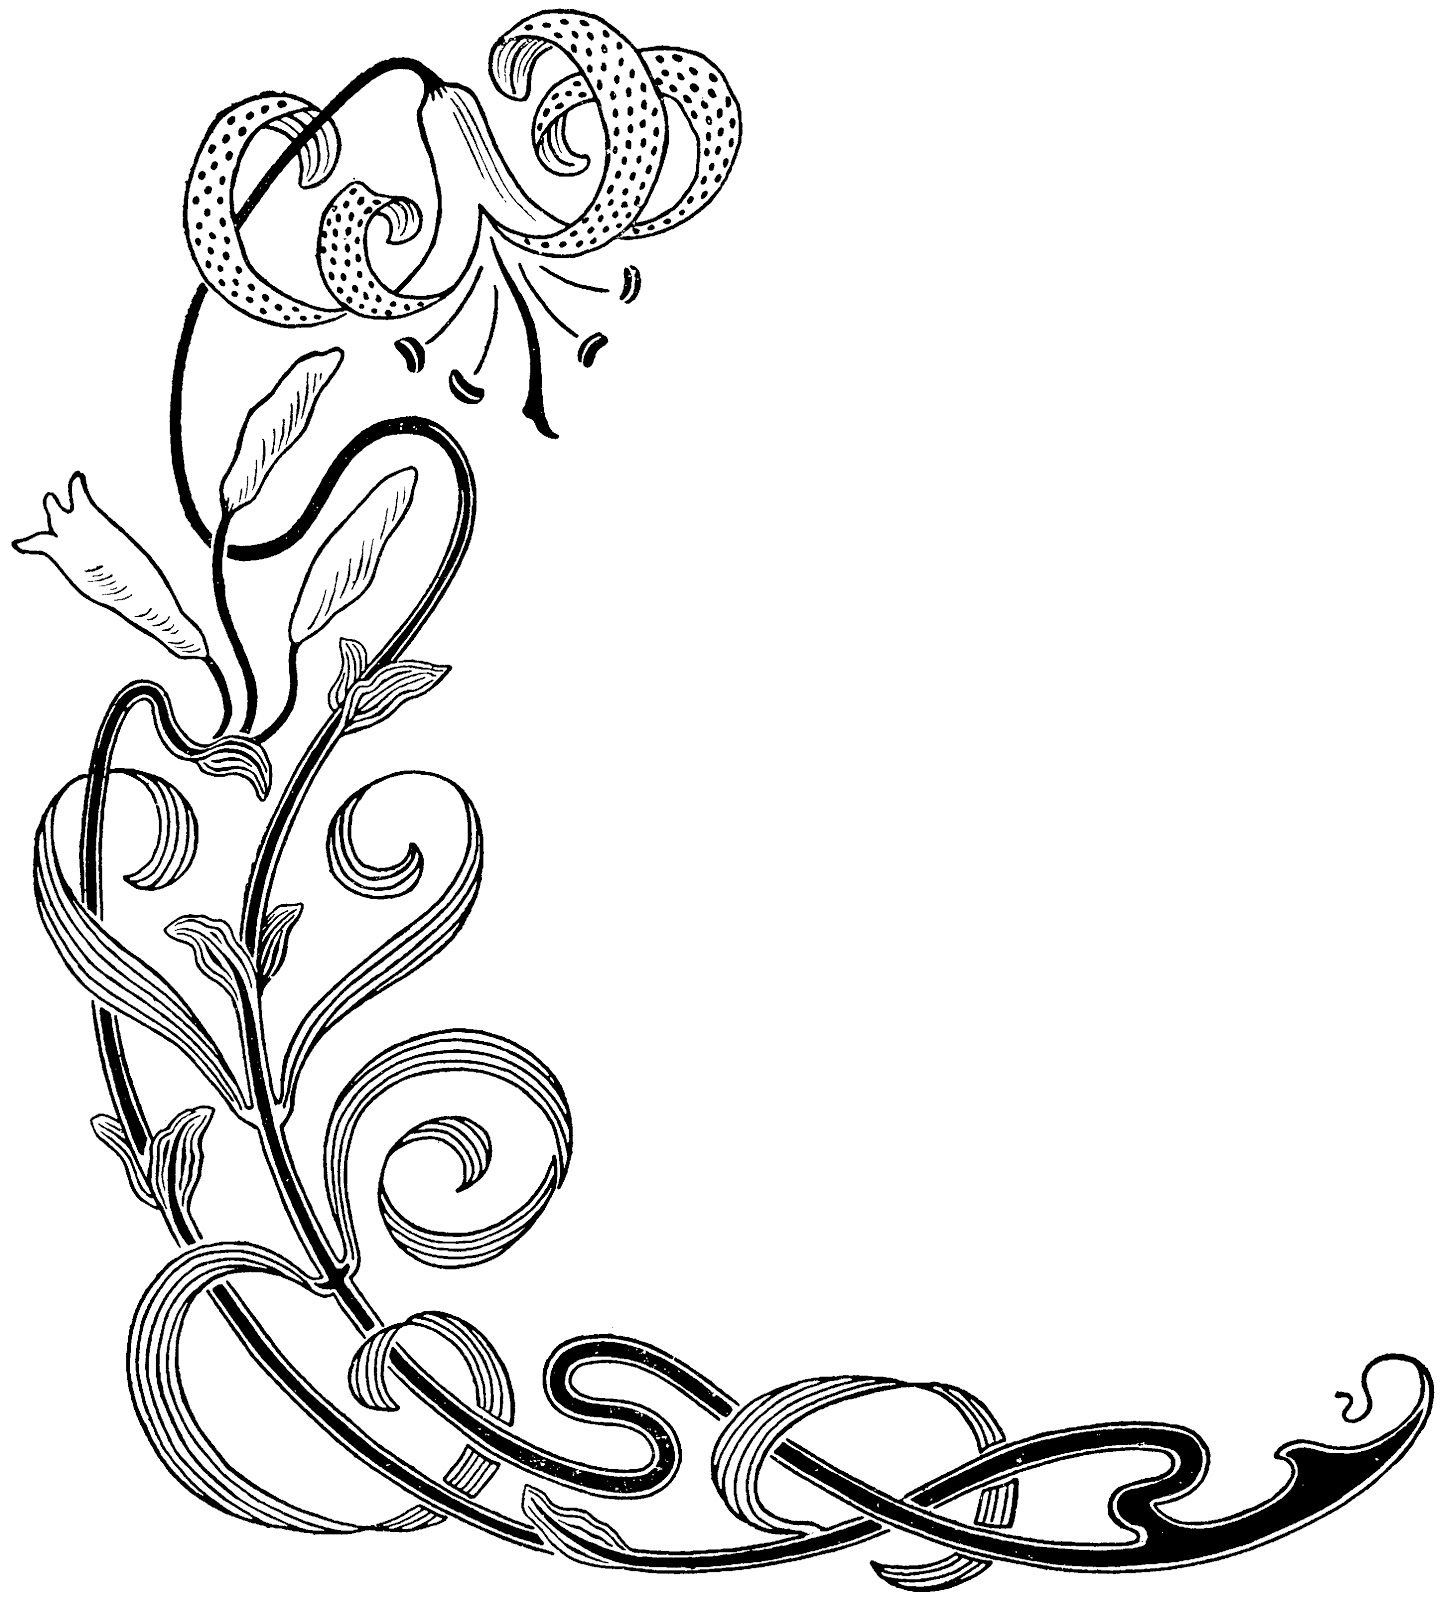 Decorative Flower Borders - Clipart library